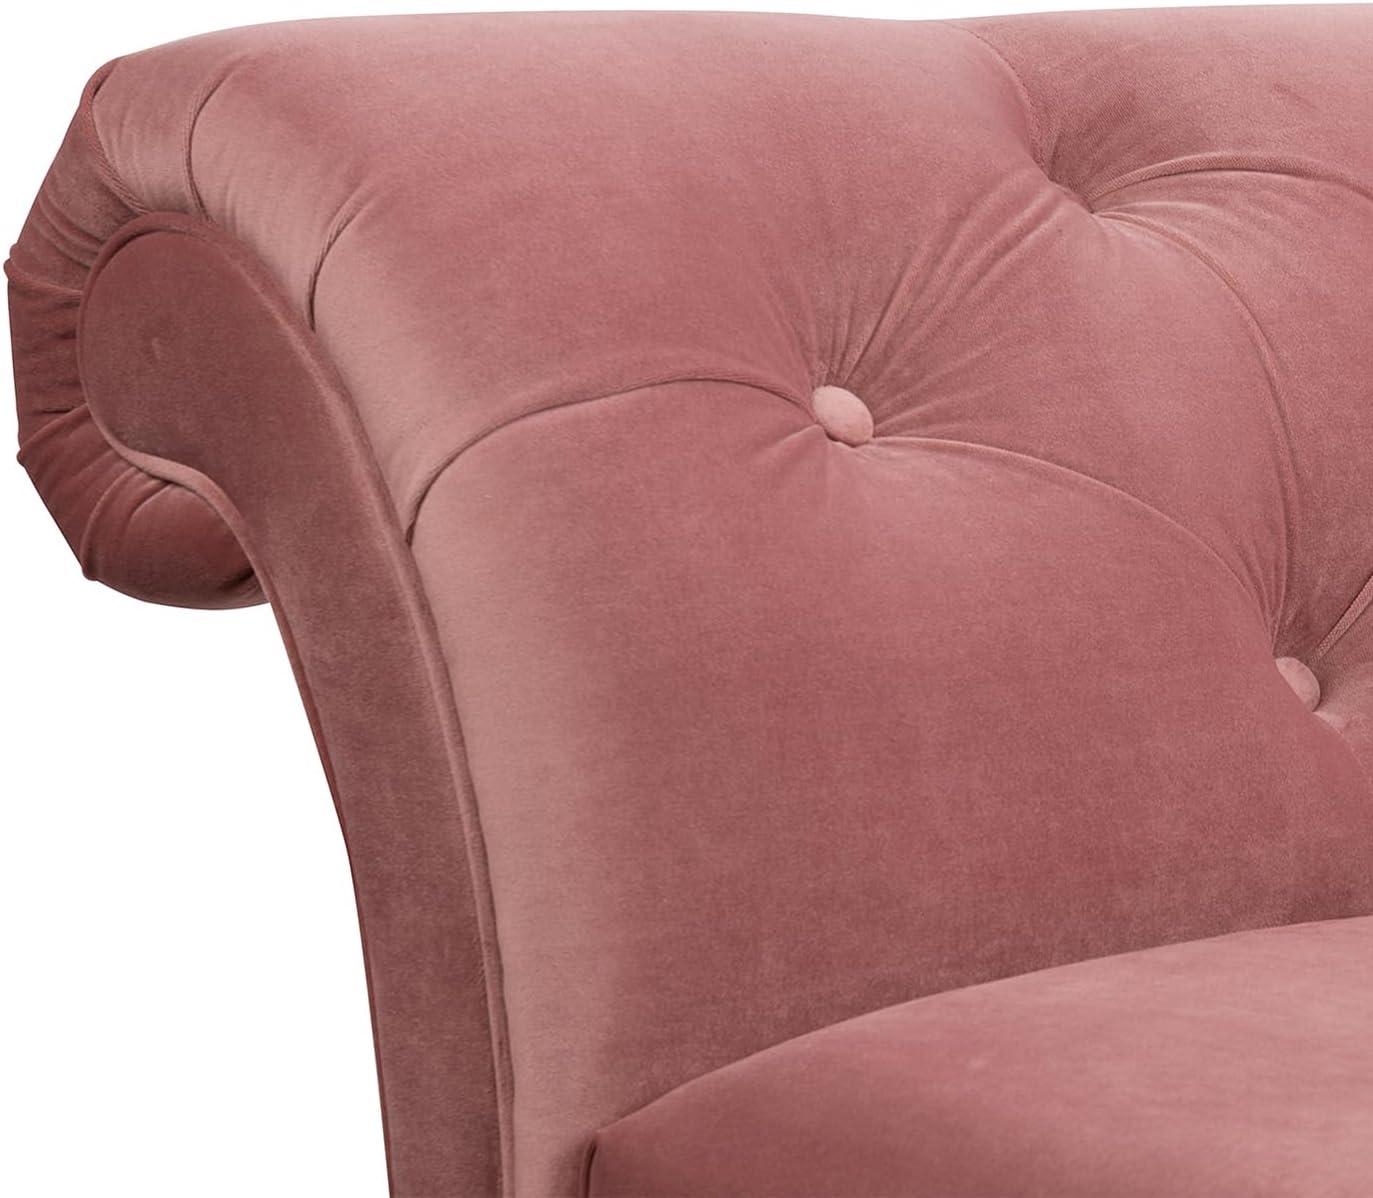 Ash Rose Velvet Handcrafted Chaise Lounge with Tufted Roll Arm